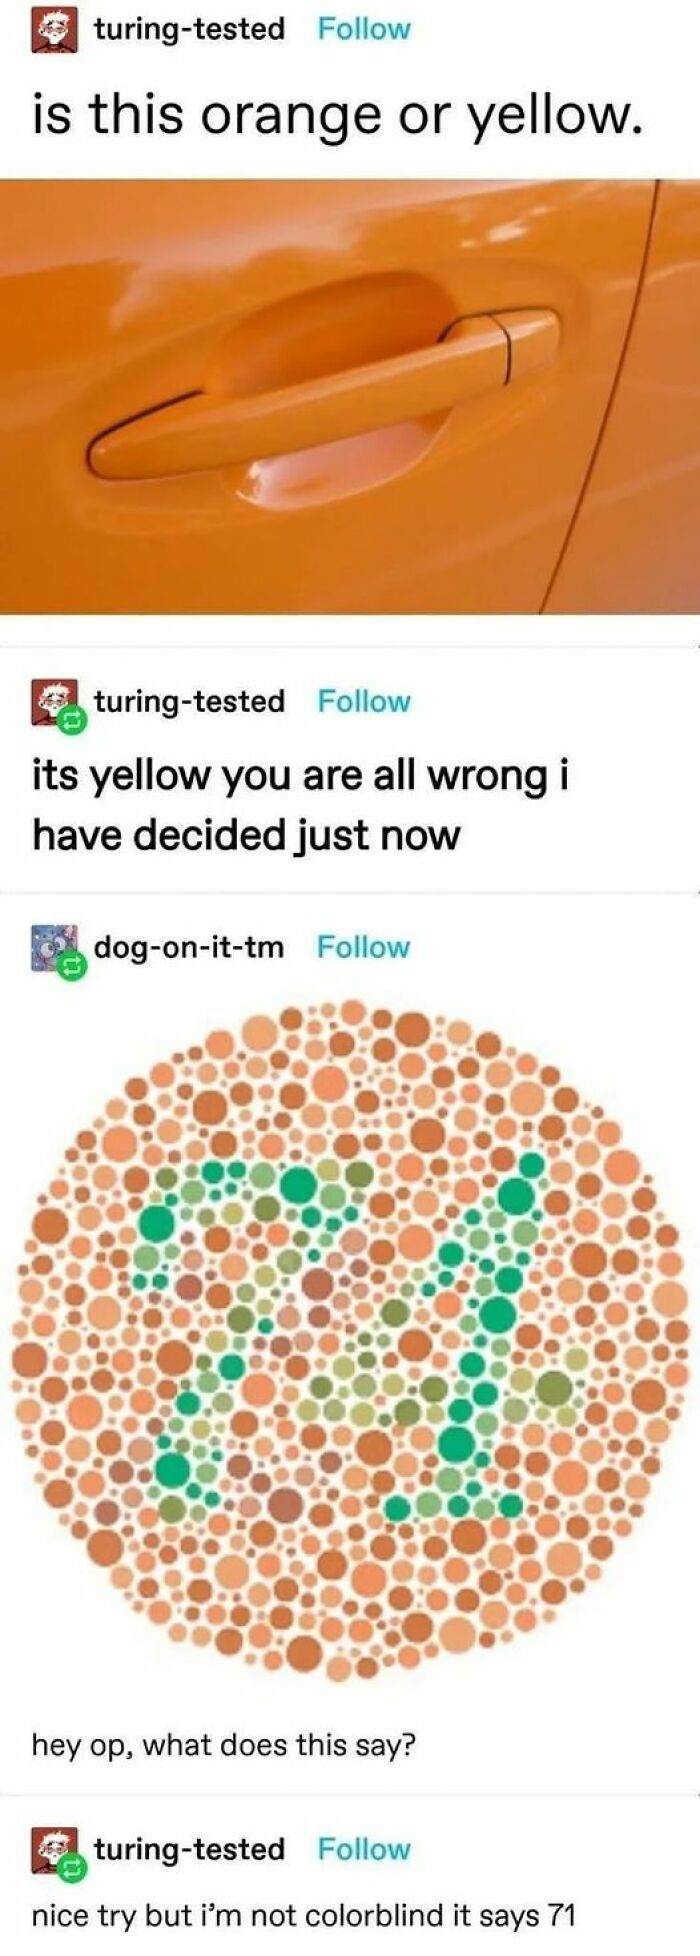 confidently incorrect - color blind test - turingtested is this orange or yellow. turingtested its yellow you are all wrong i have decided just now dogonittm hey op, what does this say? turingtested nice try but i'm not colorblind it says 71